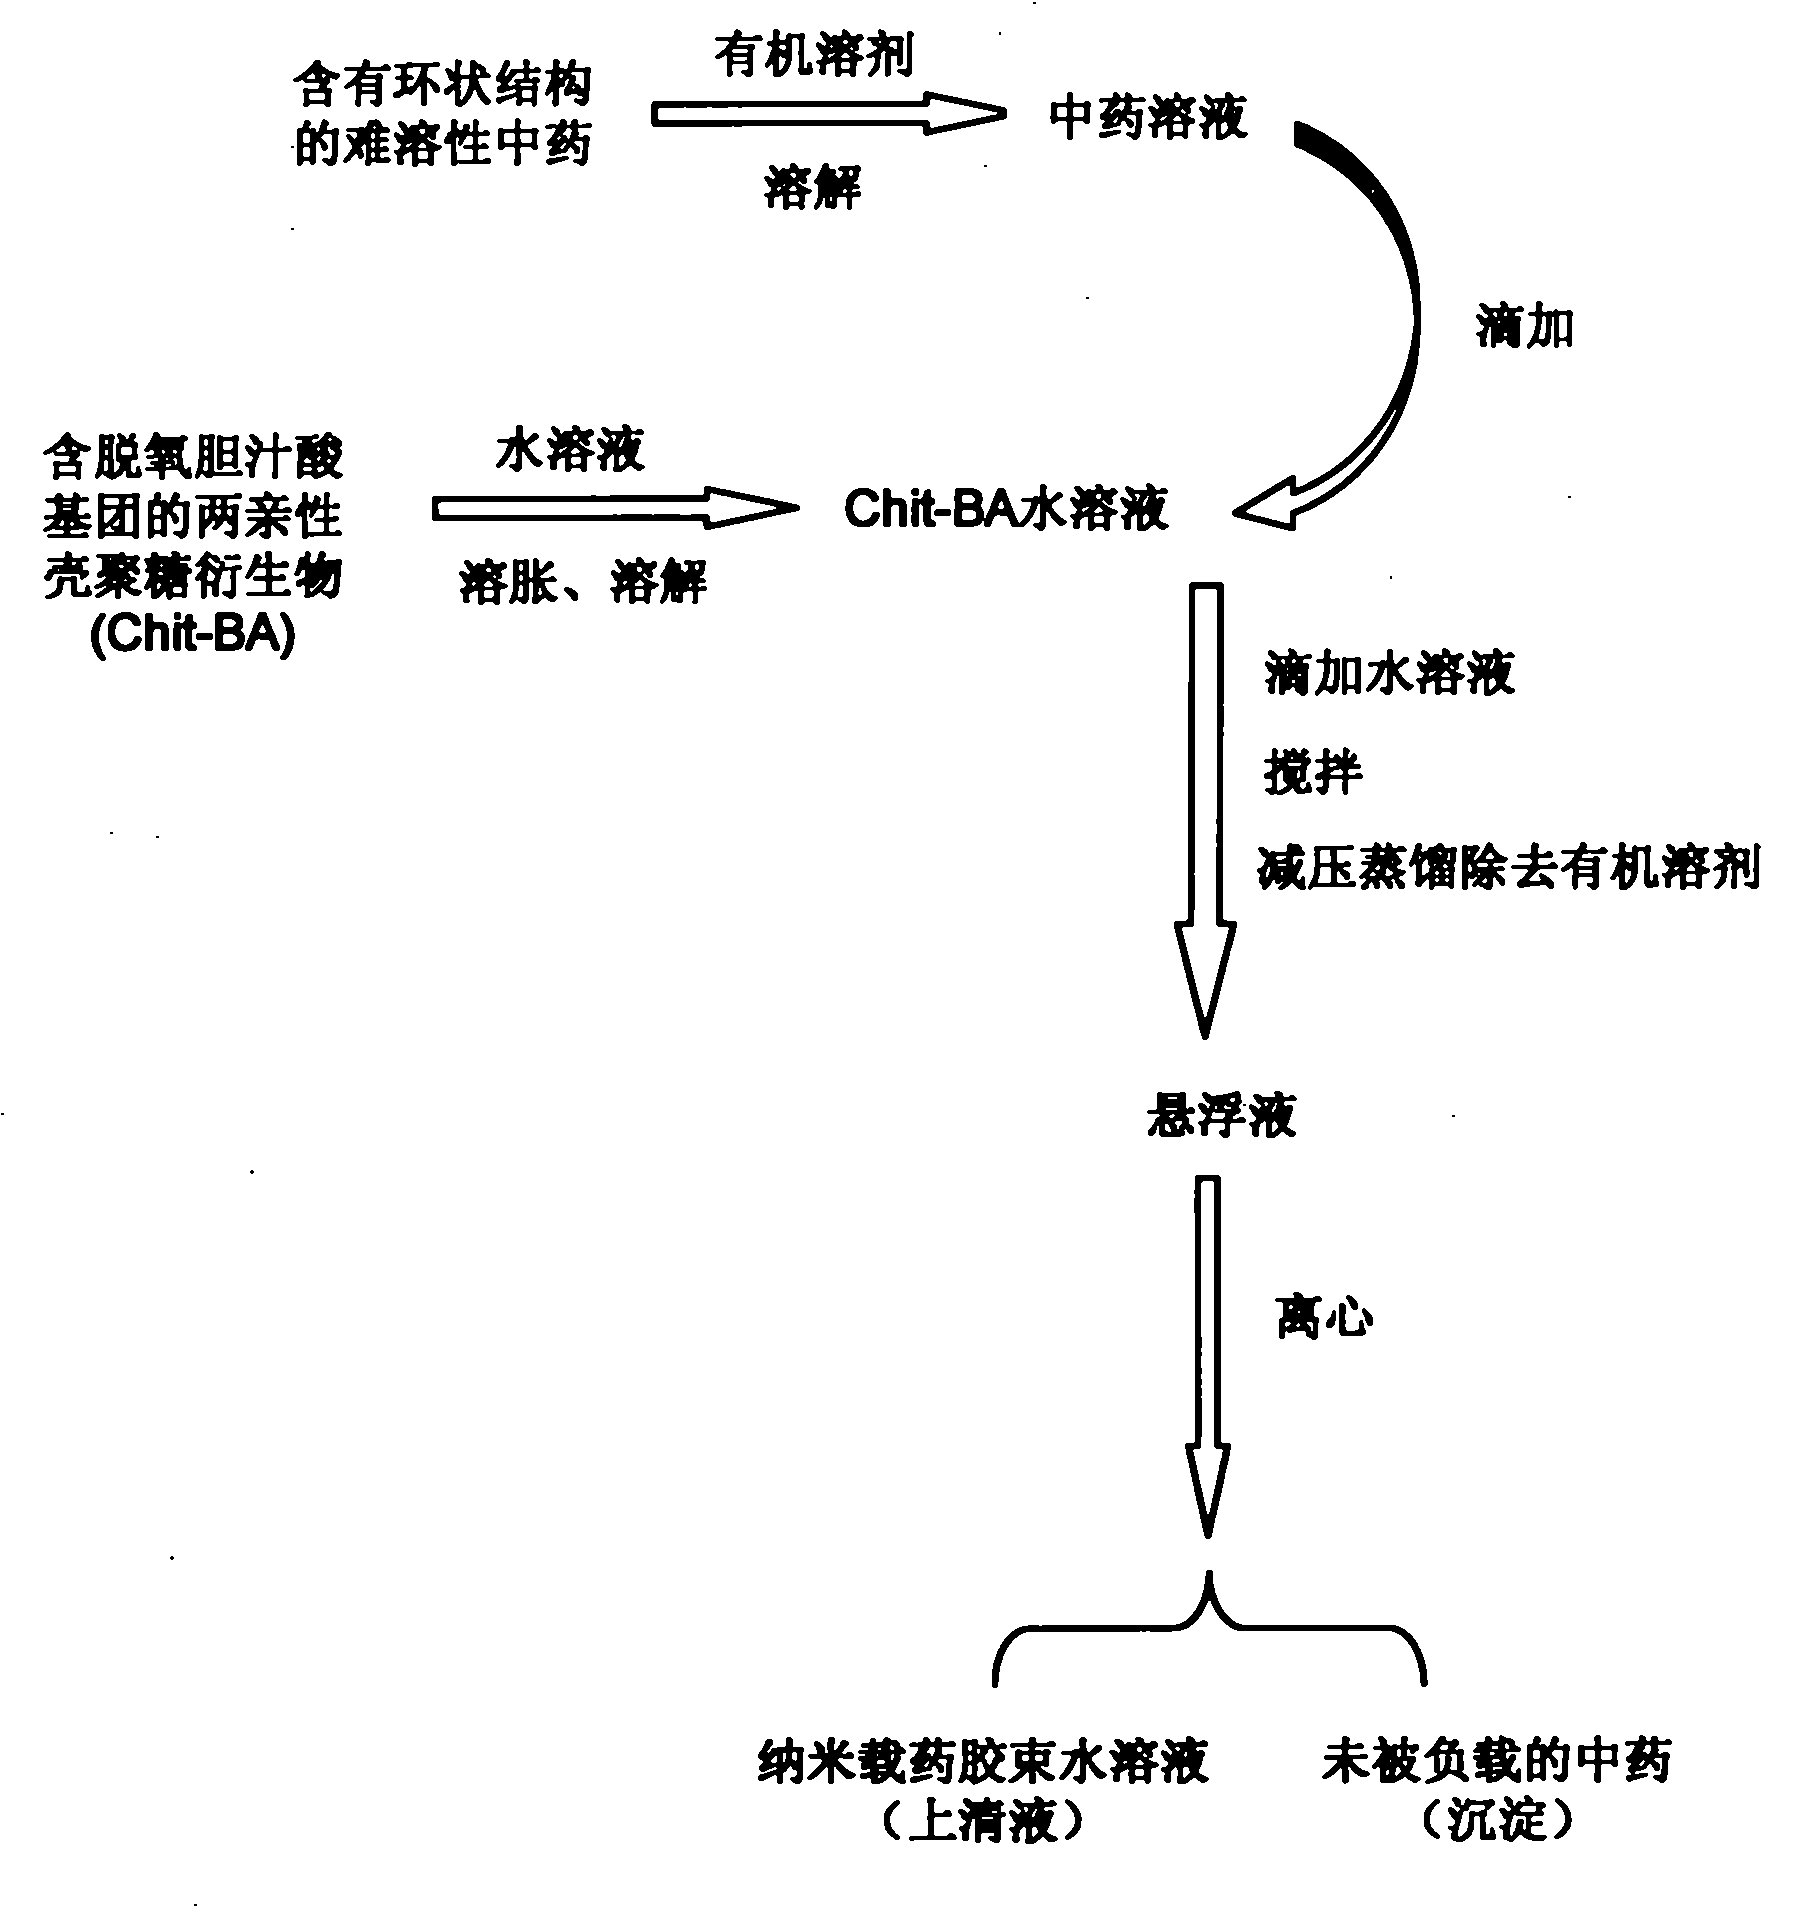 Method for preparing water-soluble nanometer preparation by insoluble traditional Chinese medicine containing ring structures